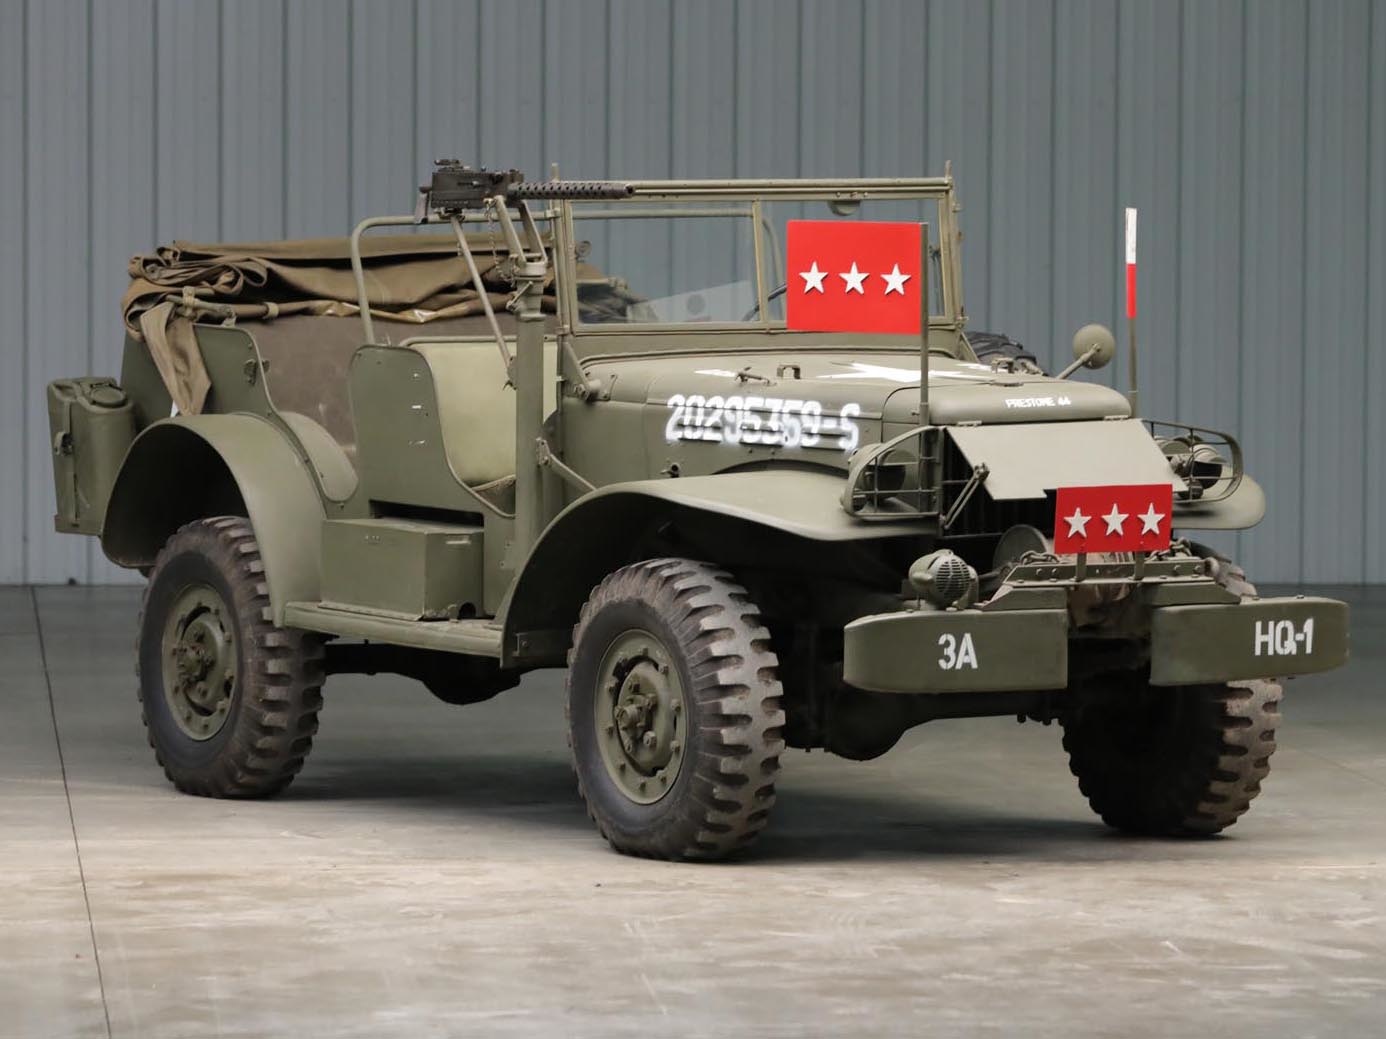 A Jeep used by General Patton was auctioned off on June 13.